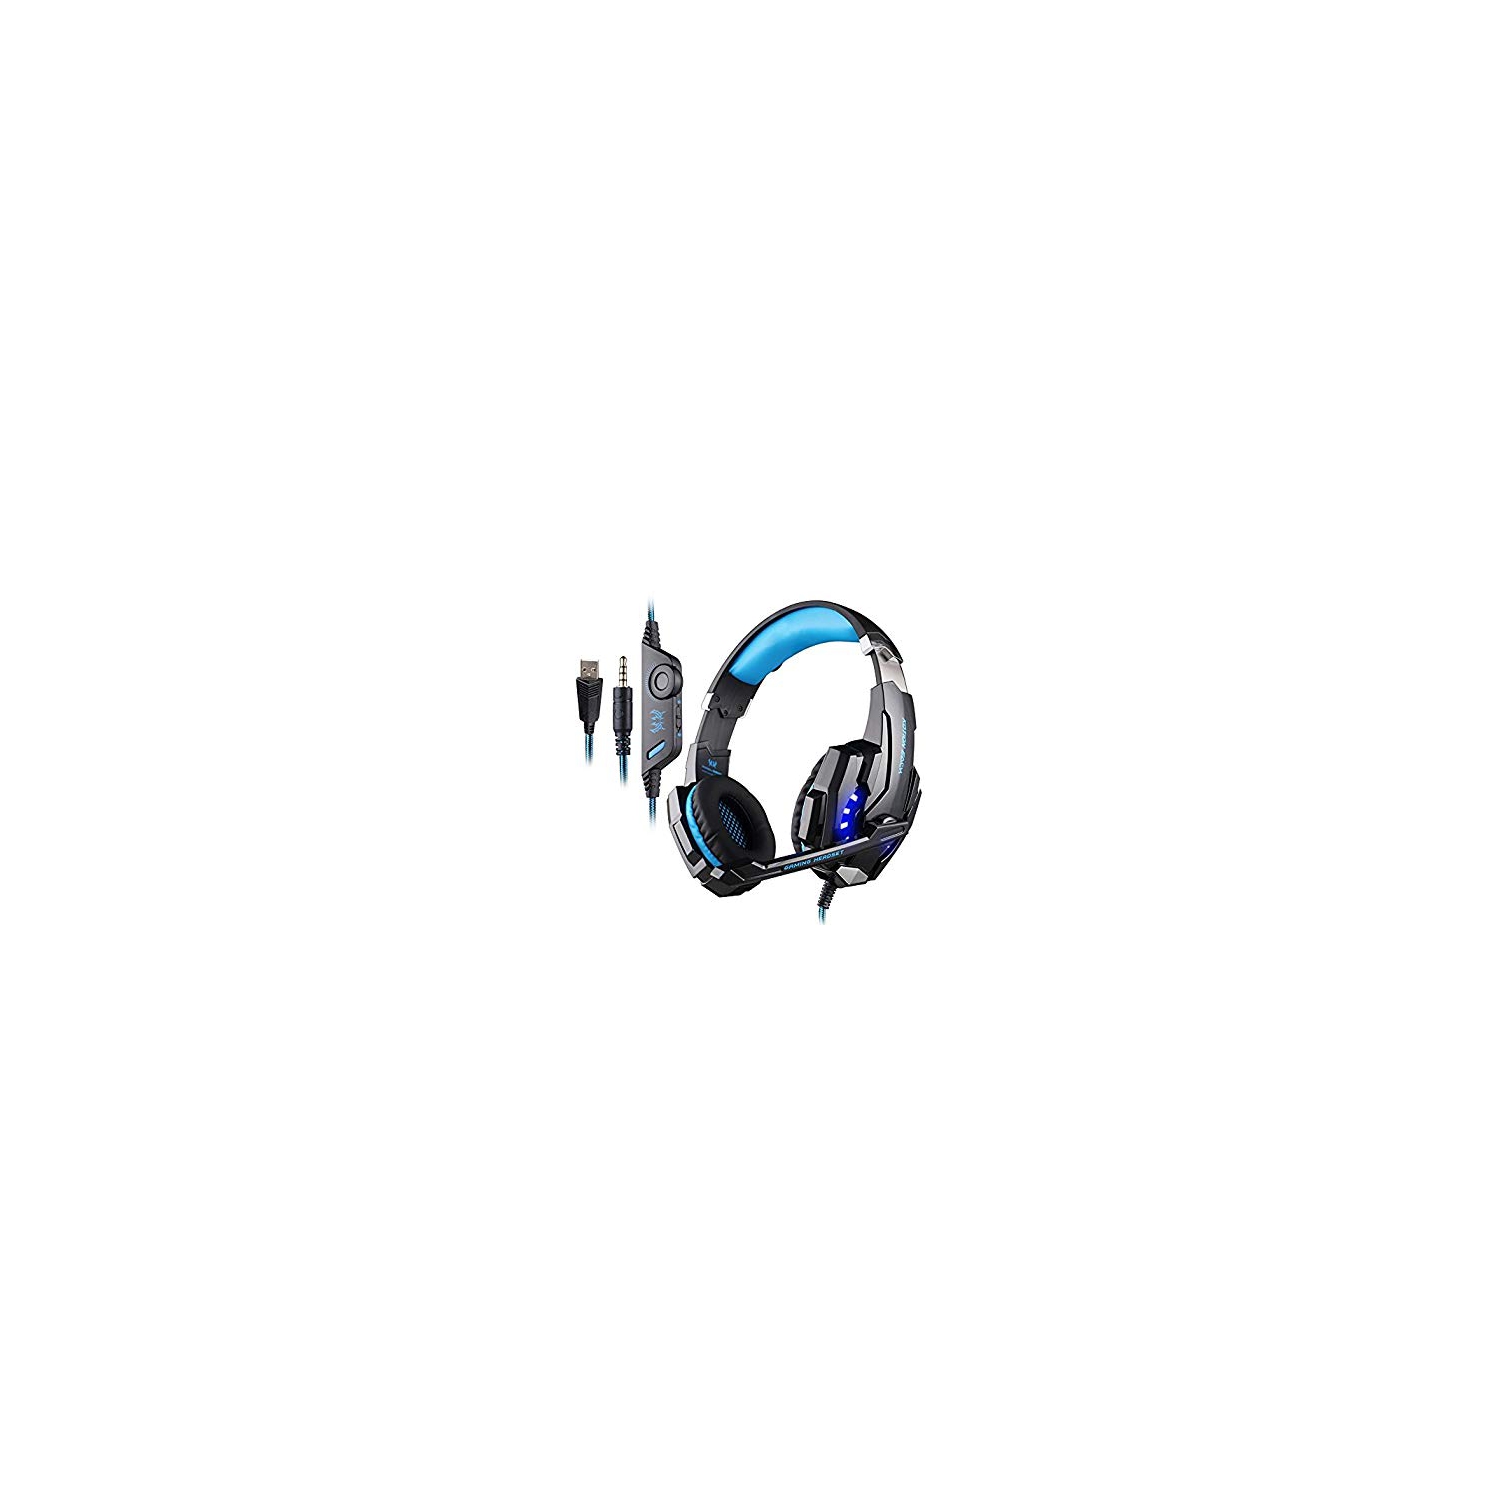 PC Gaming Headset Headphone for PlayStation 4 PS4 Xbox One Laptop Tablet Smartphone 3.5mm Stereo earphone with Mic Noise Reduc